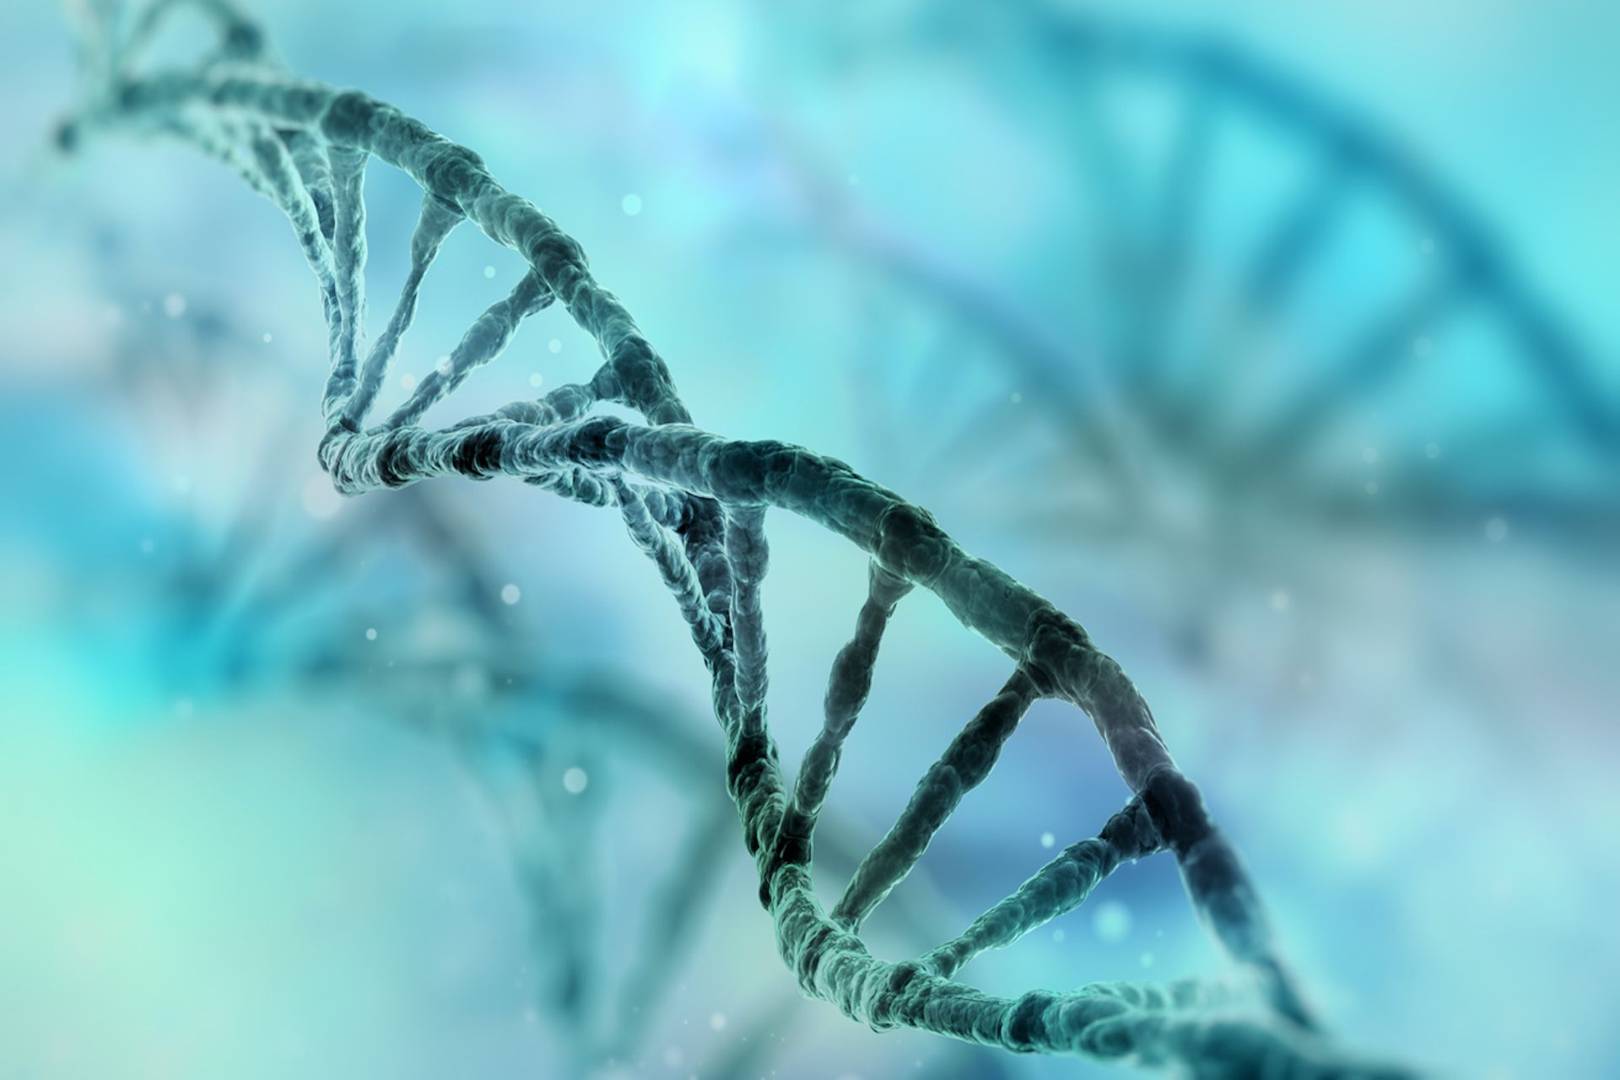 These lifeforms have been 'created' using the world's first stable six-letter DNA code